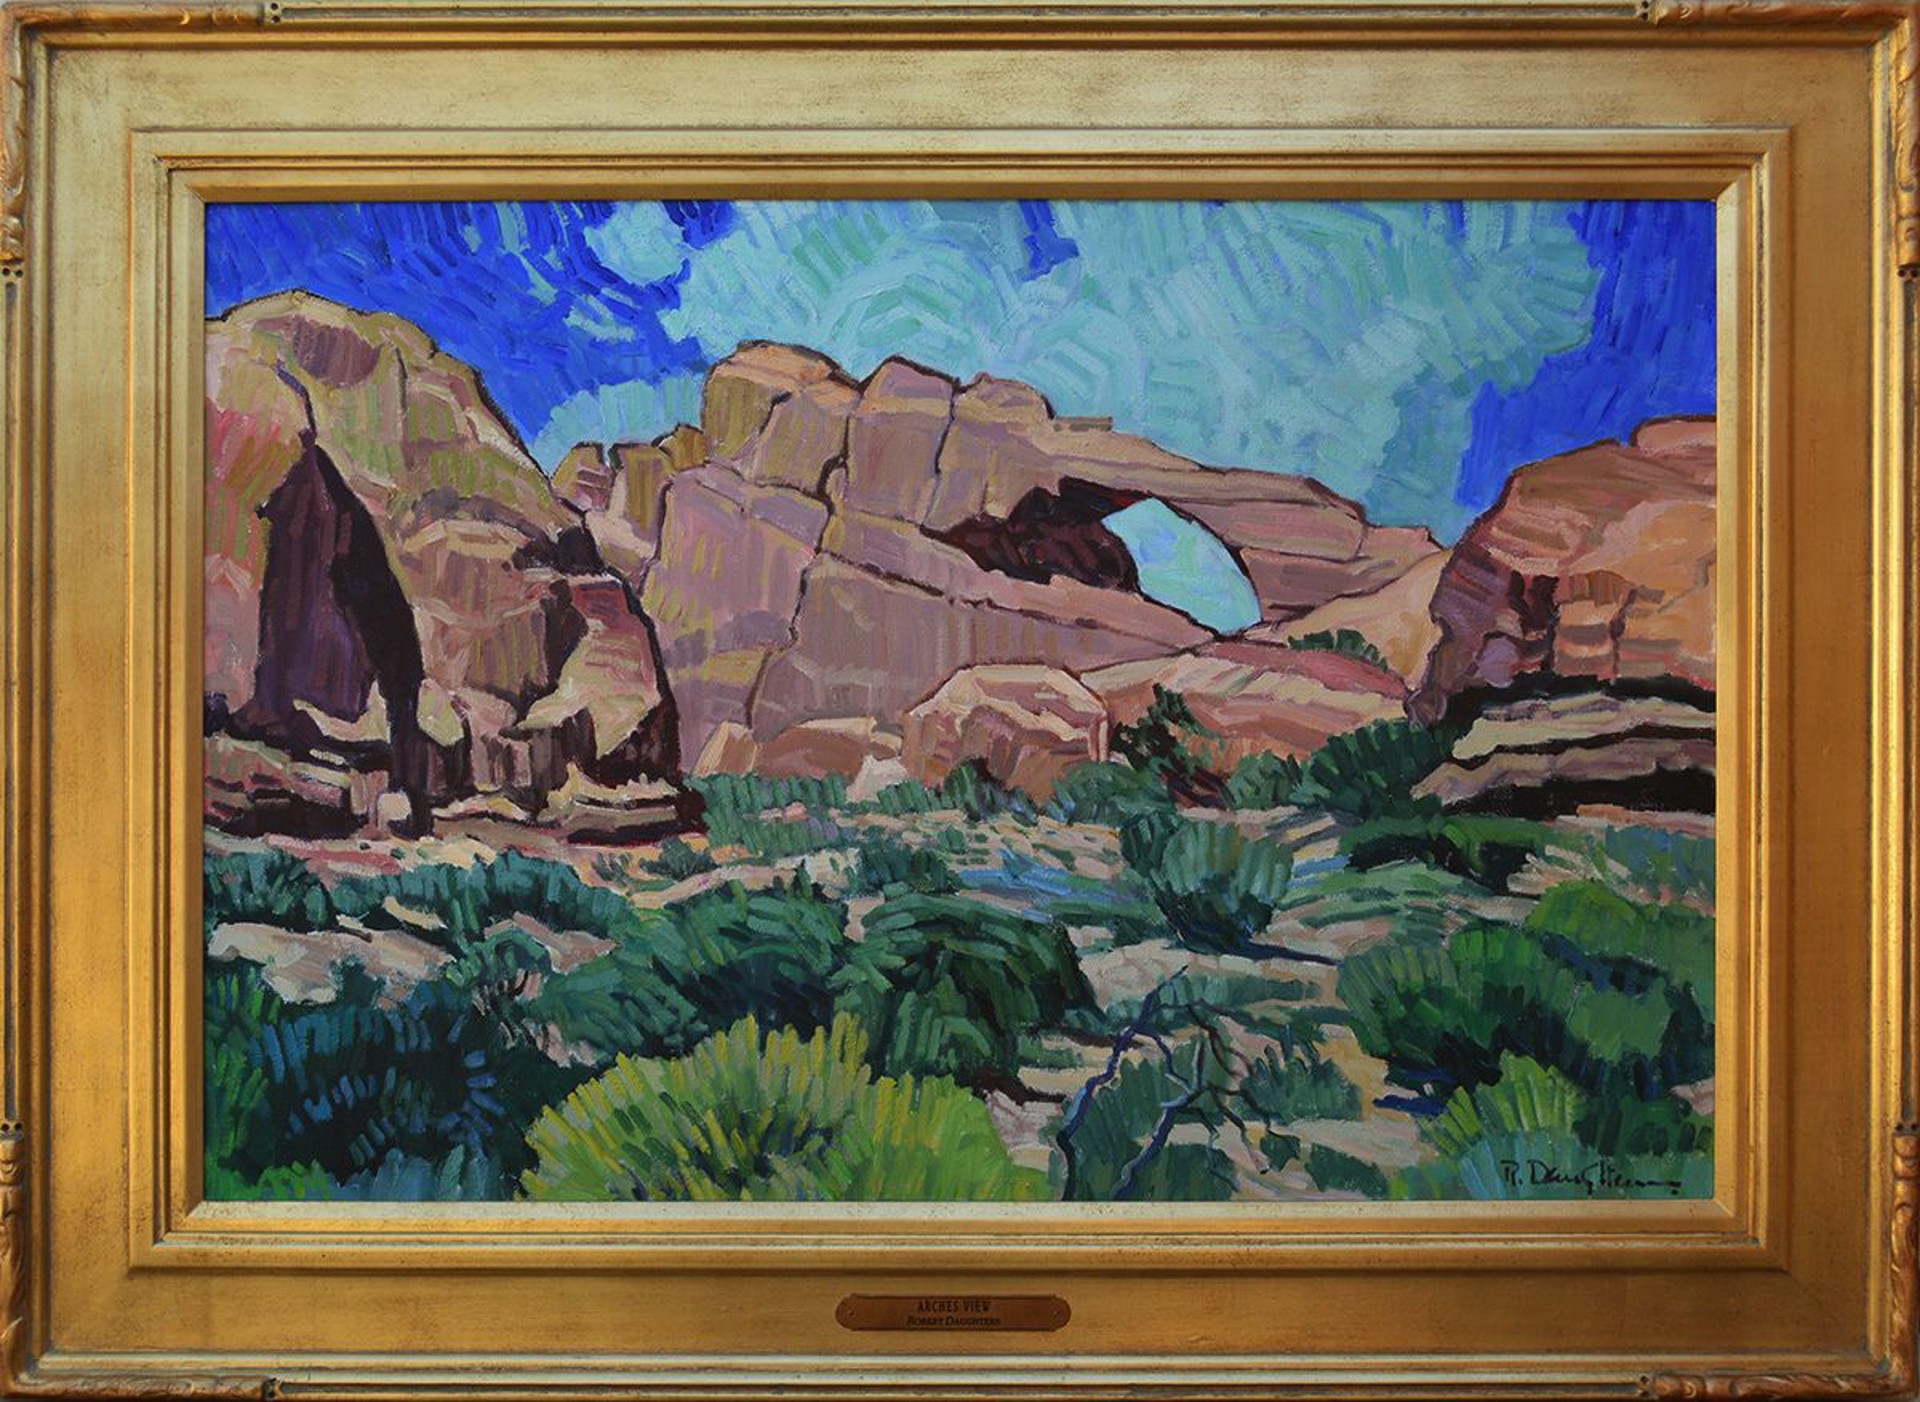 Arches National Monument by Robert Daughters (1929-2013)